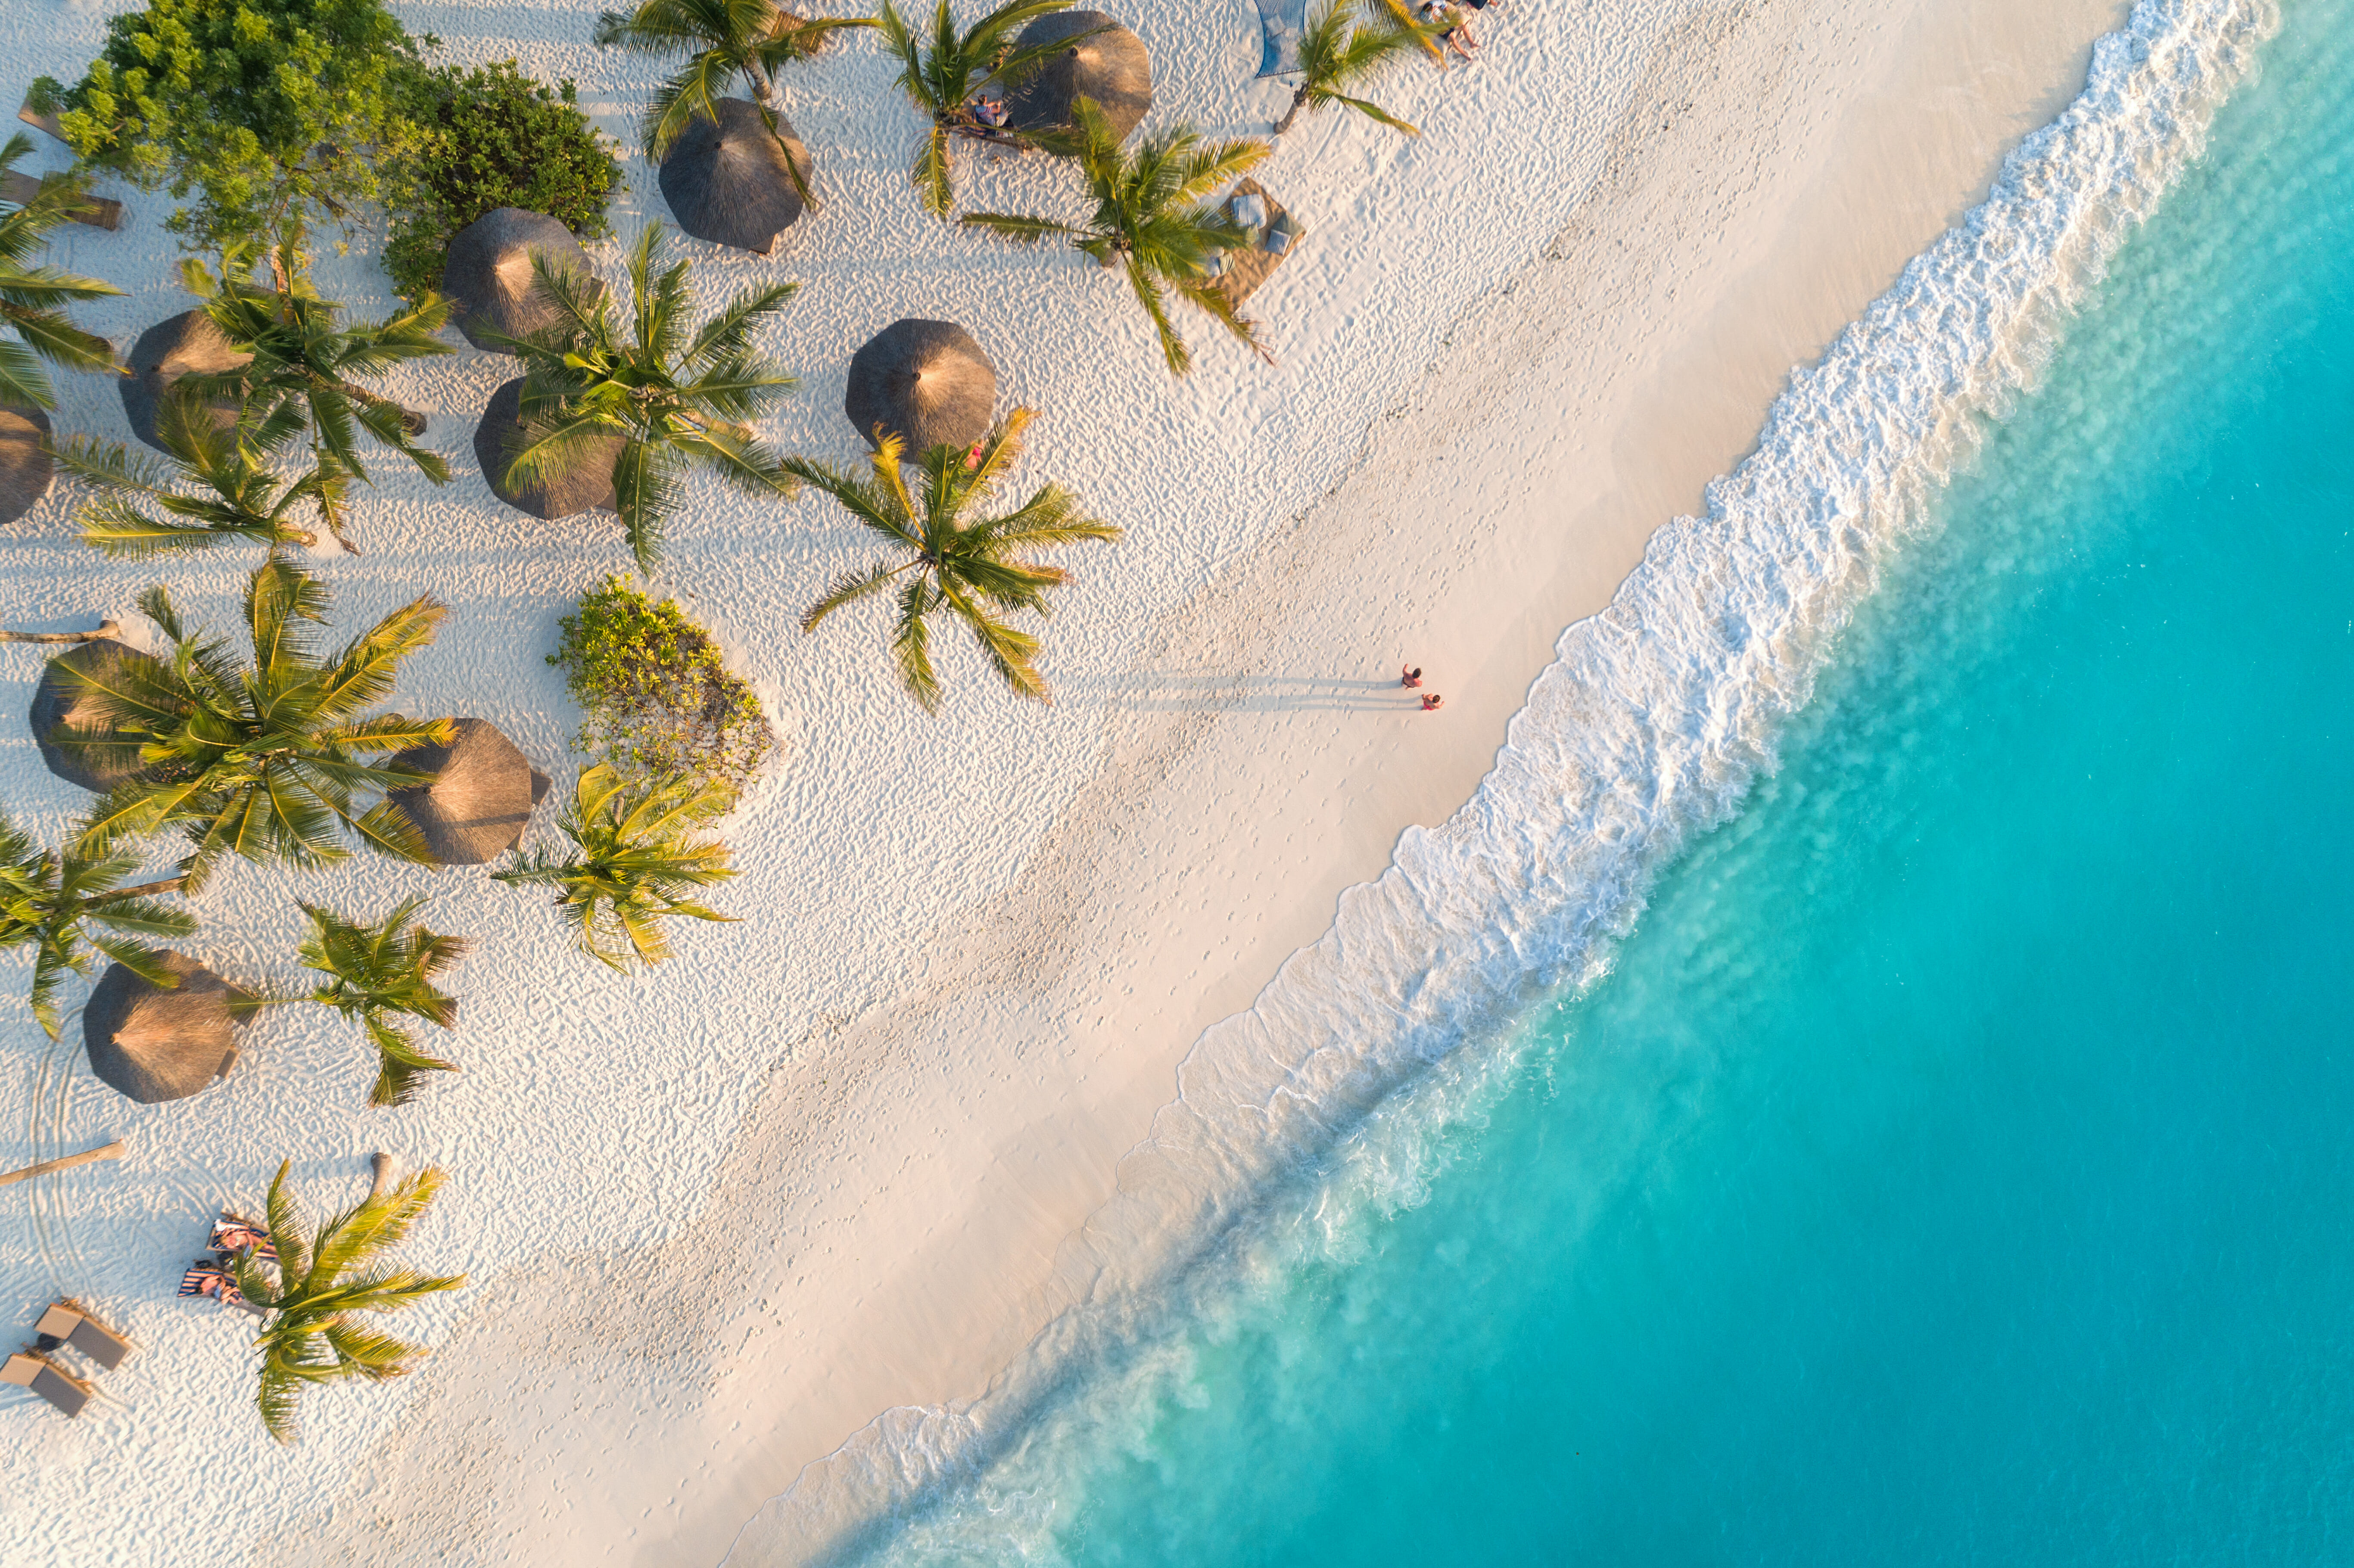 6 Incredible Things You Can Do on a Maldives Holiday